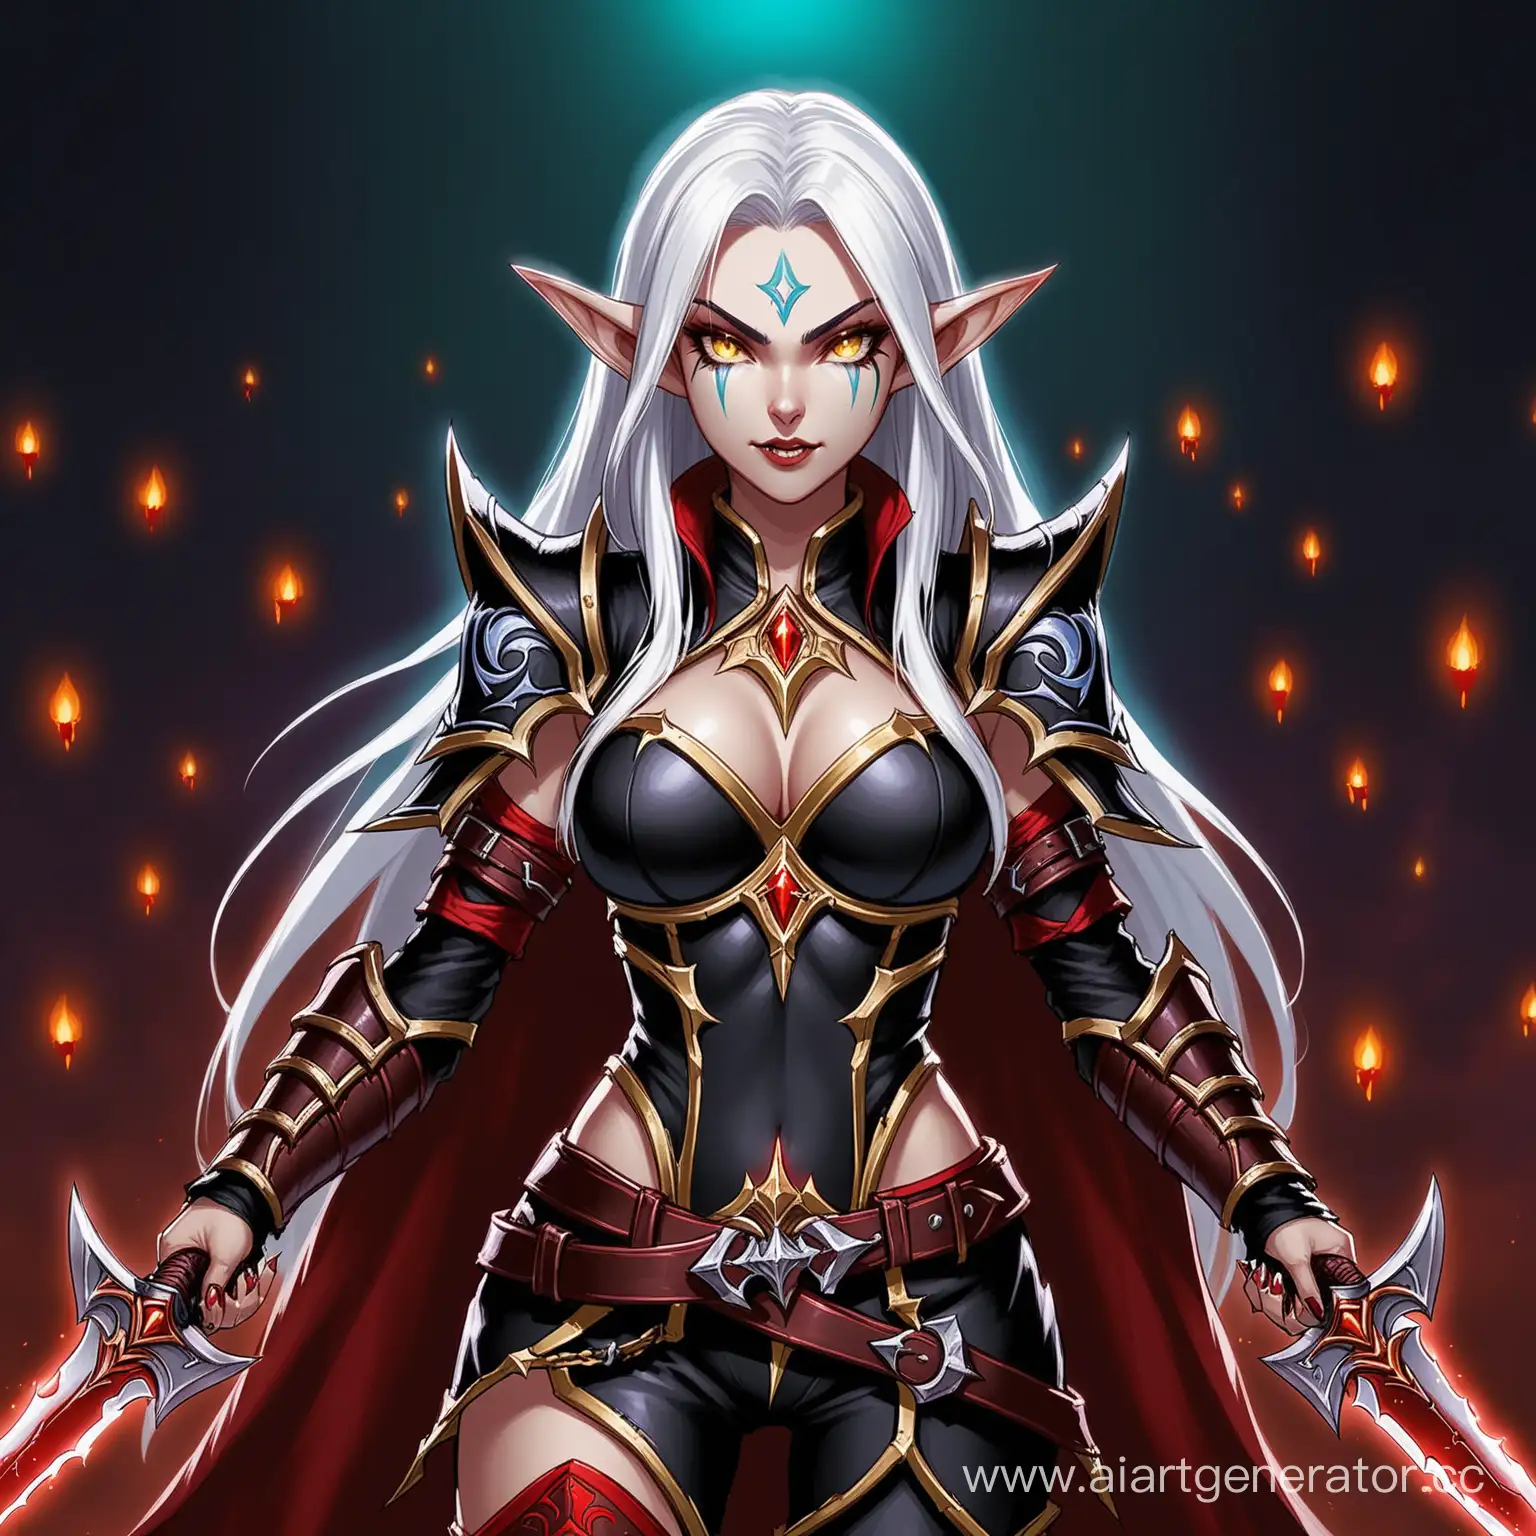 Mysterious-Night-Elf-Rogue-with-Dual-Daggers-Warcraft-Inspired-Fantasy-Art